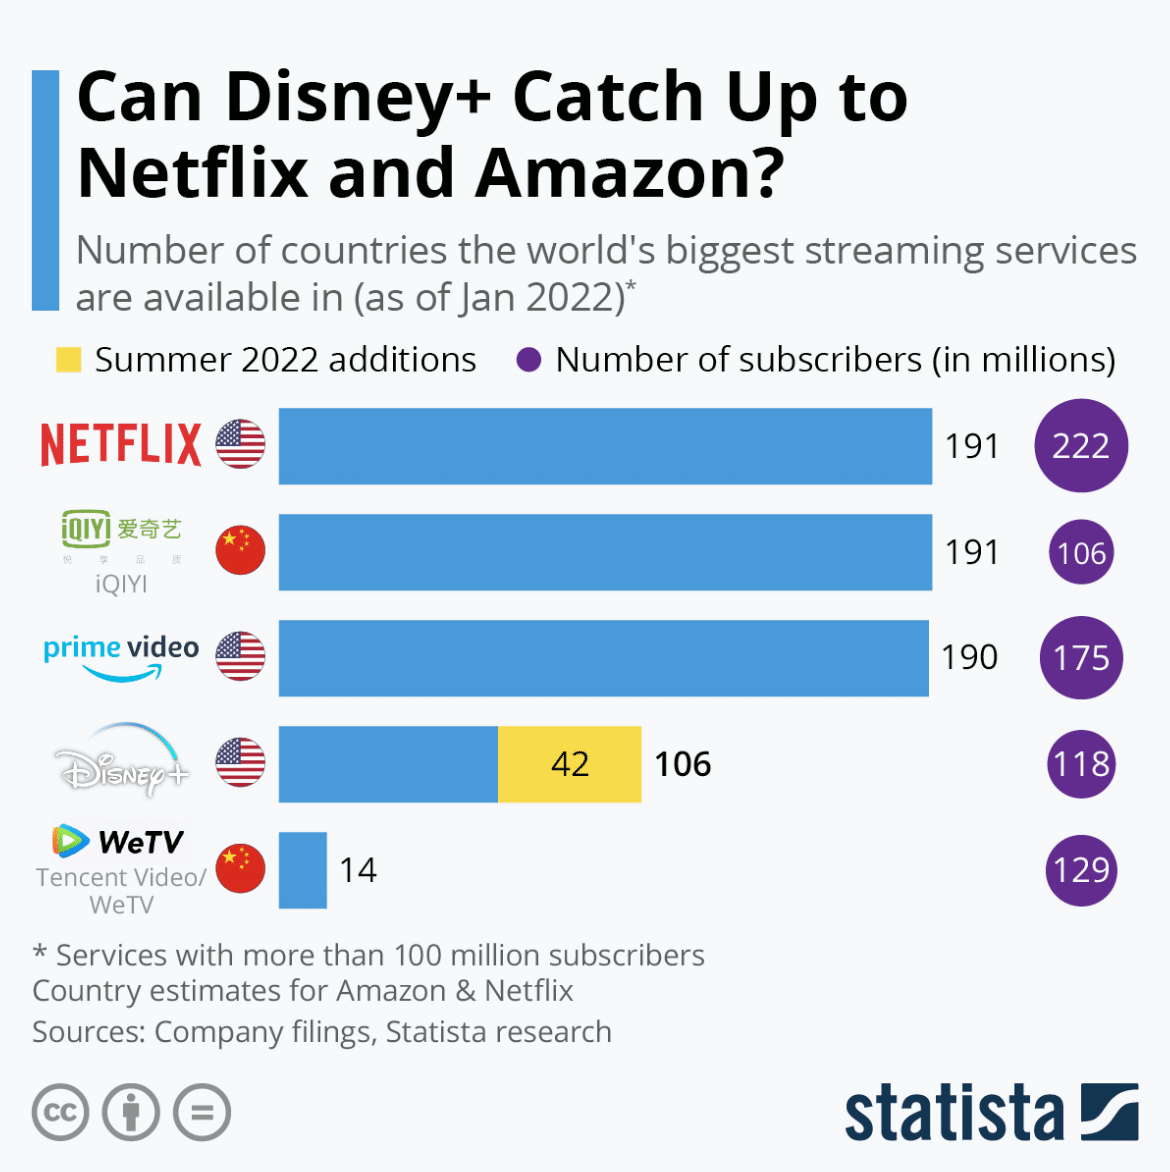 The world’s biggest streaming services available in 2022